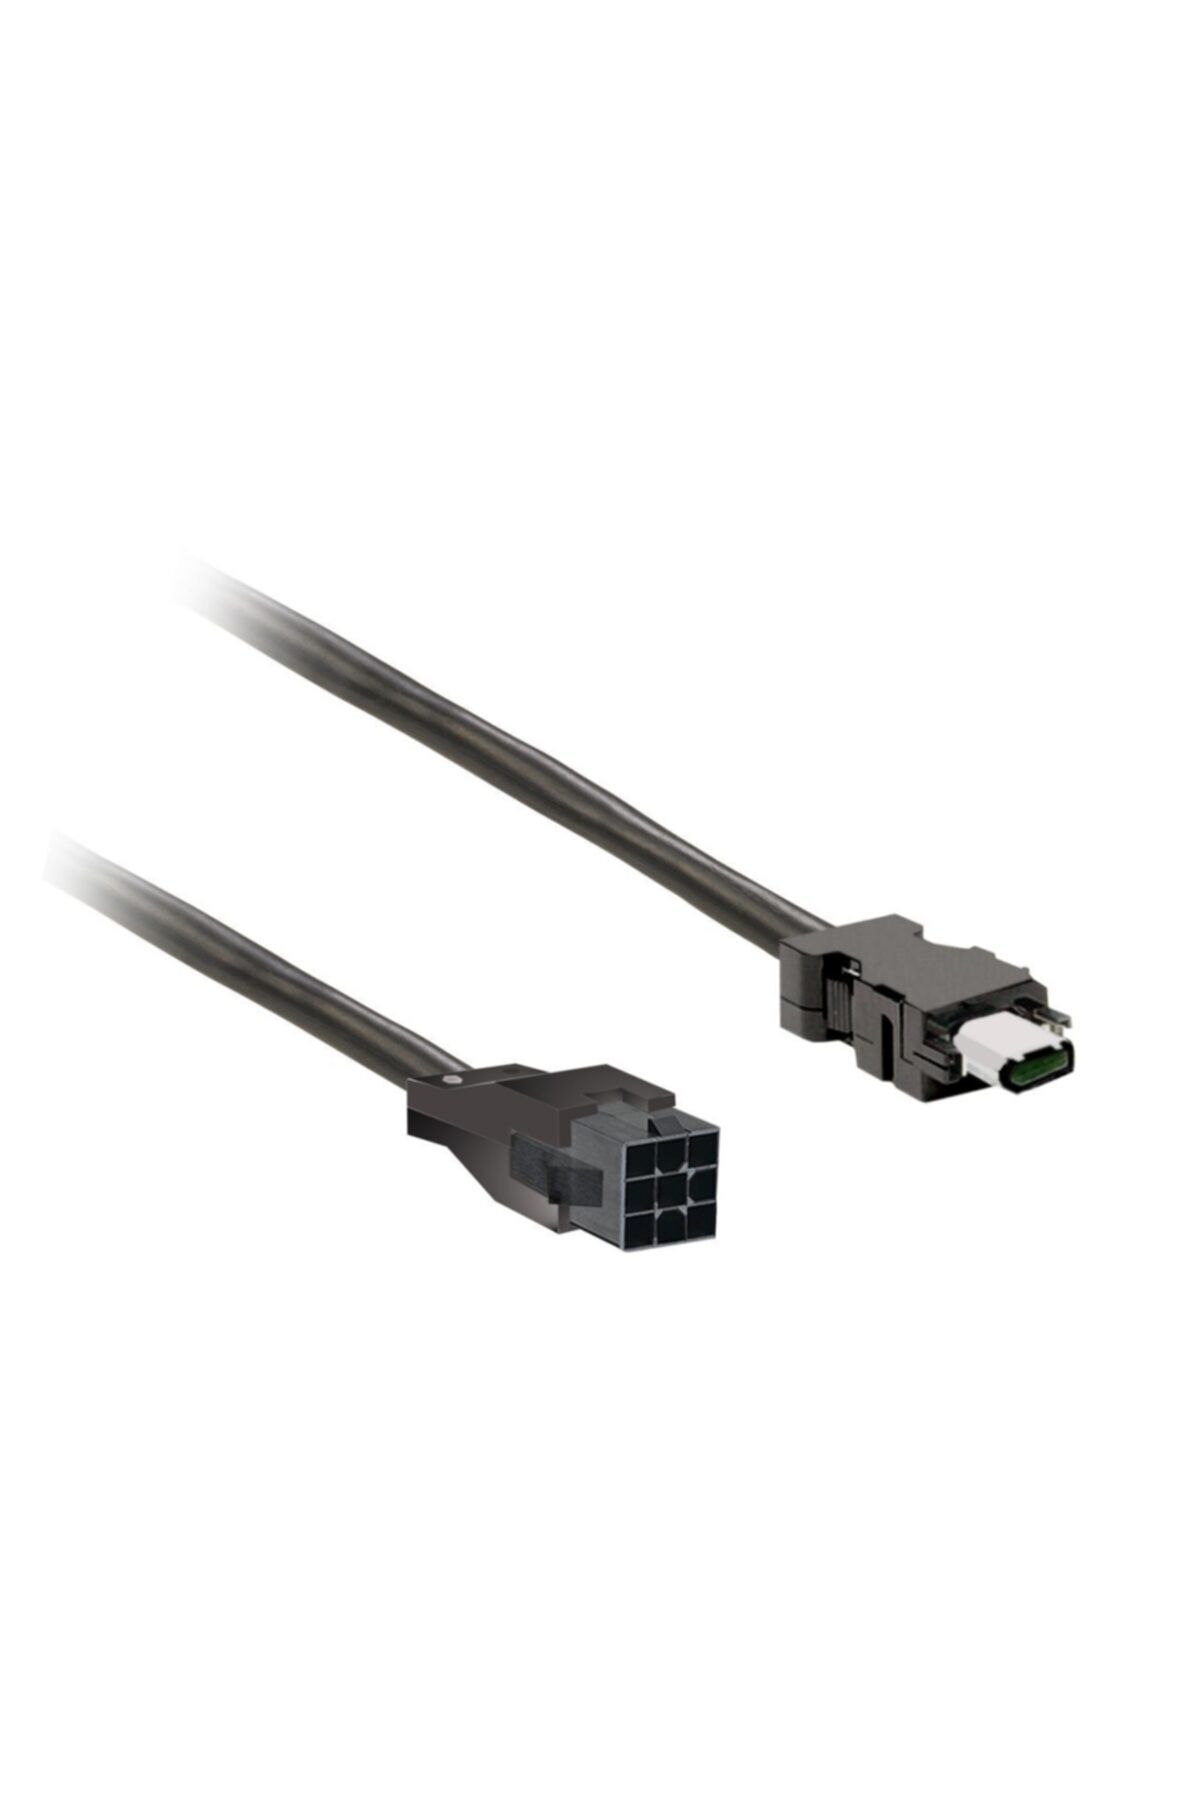 Schneider Vw3m8d1ar50 Encoder Cable 5m Shielded, Leads Connection For Bch2.b/.d/.f, Cn2 Plu